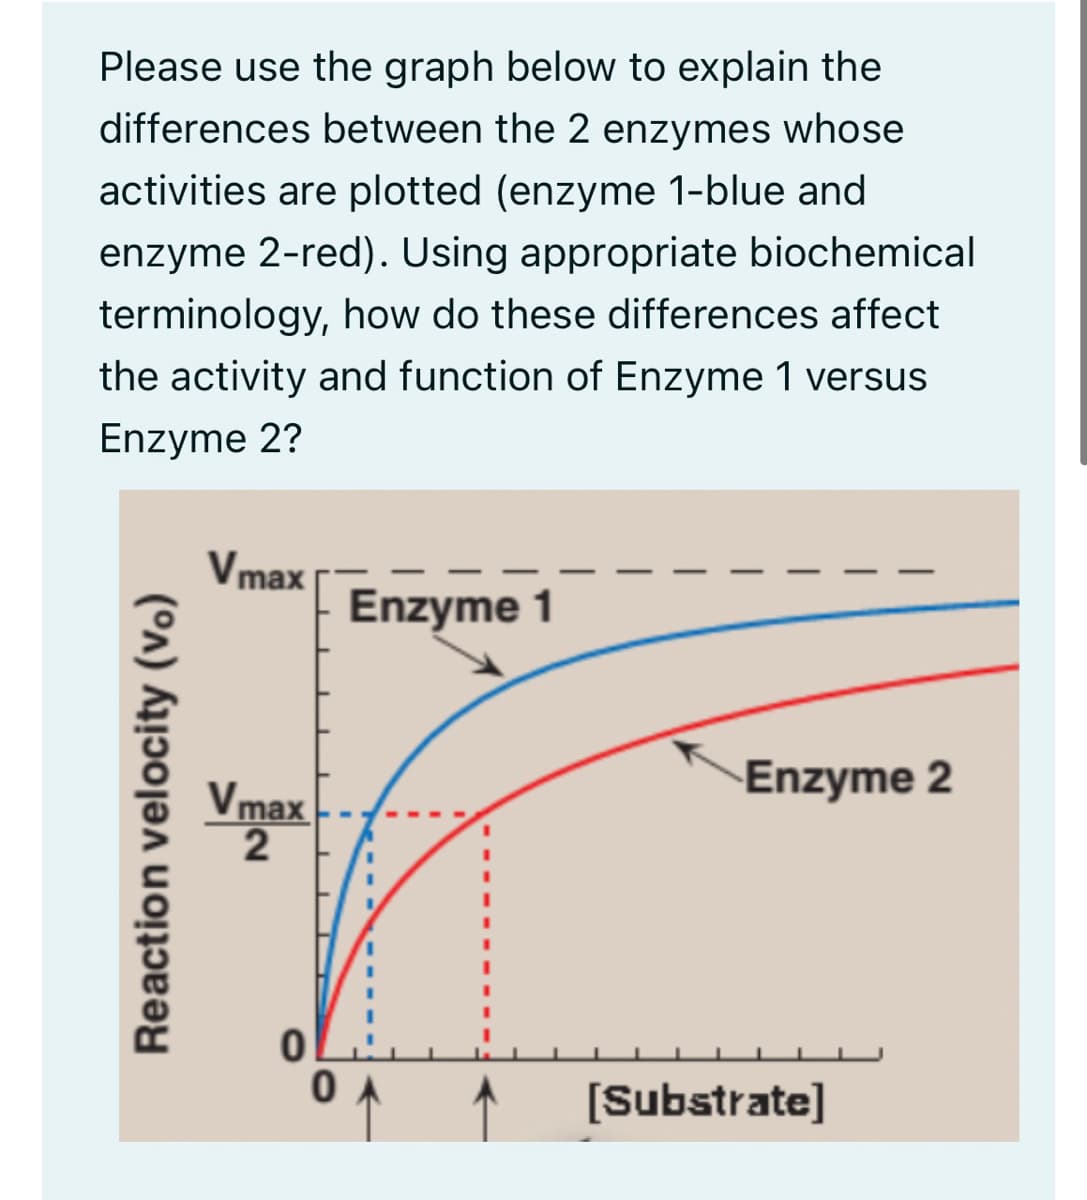 Please use the graph below to explain the
differences between the 2 enzymes whose
activities are plotted (enzyme 1-blue and
enzyme 2-red). Using appropriate biochemical
terminology, how do these differences affect
the activity and function of Enzyme 1 versus
Enzyme 2?
Reaction velocity (vo)
Vmax
Vmax
2
0
0
Enzyme 1
Enzyme 2
[Substrate]